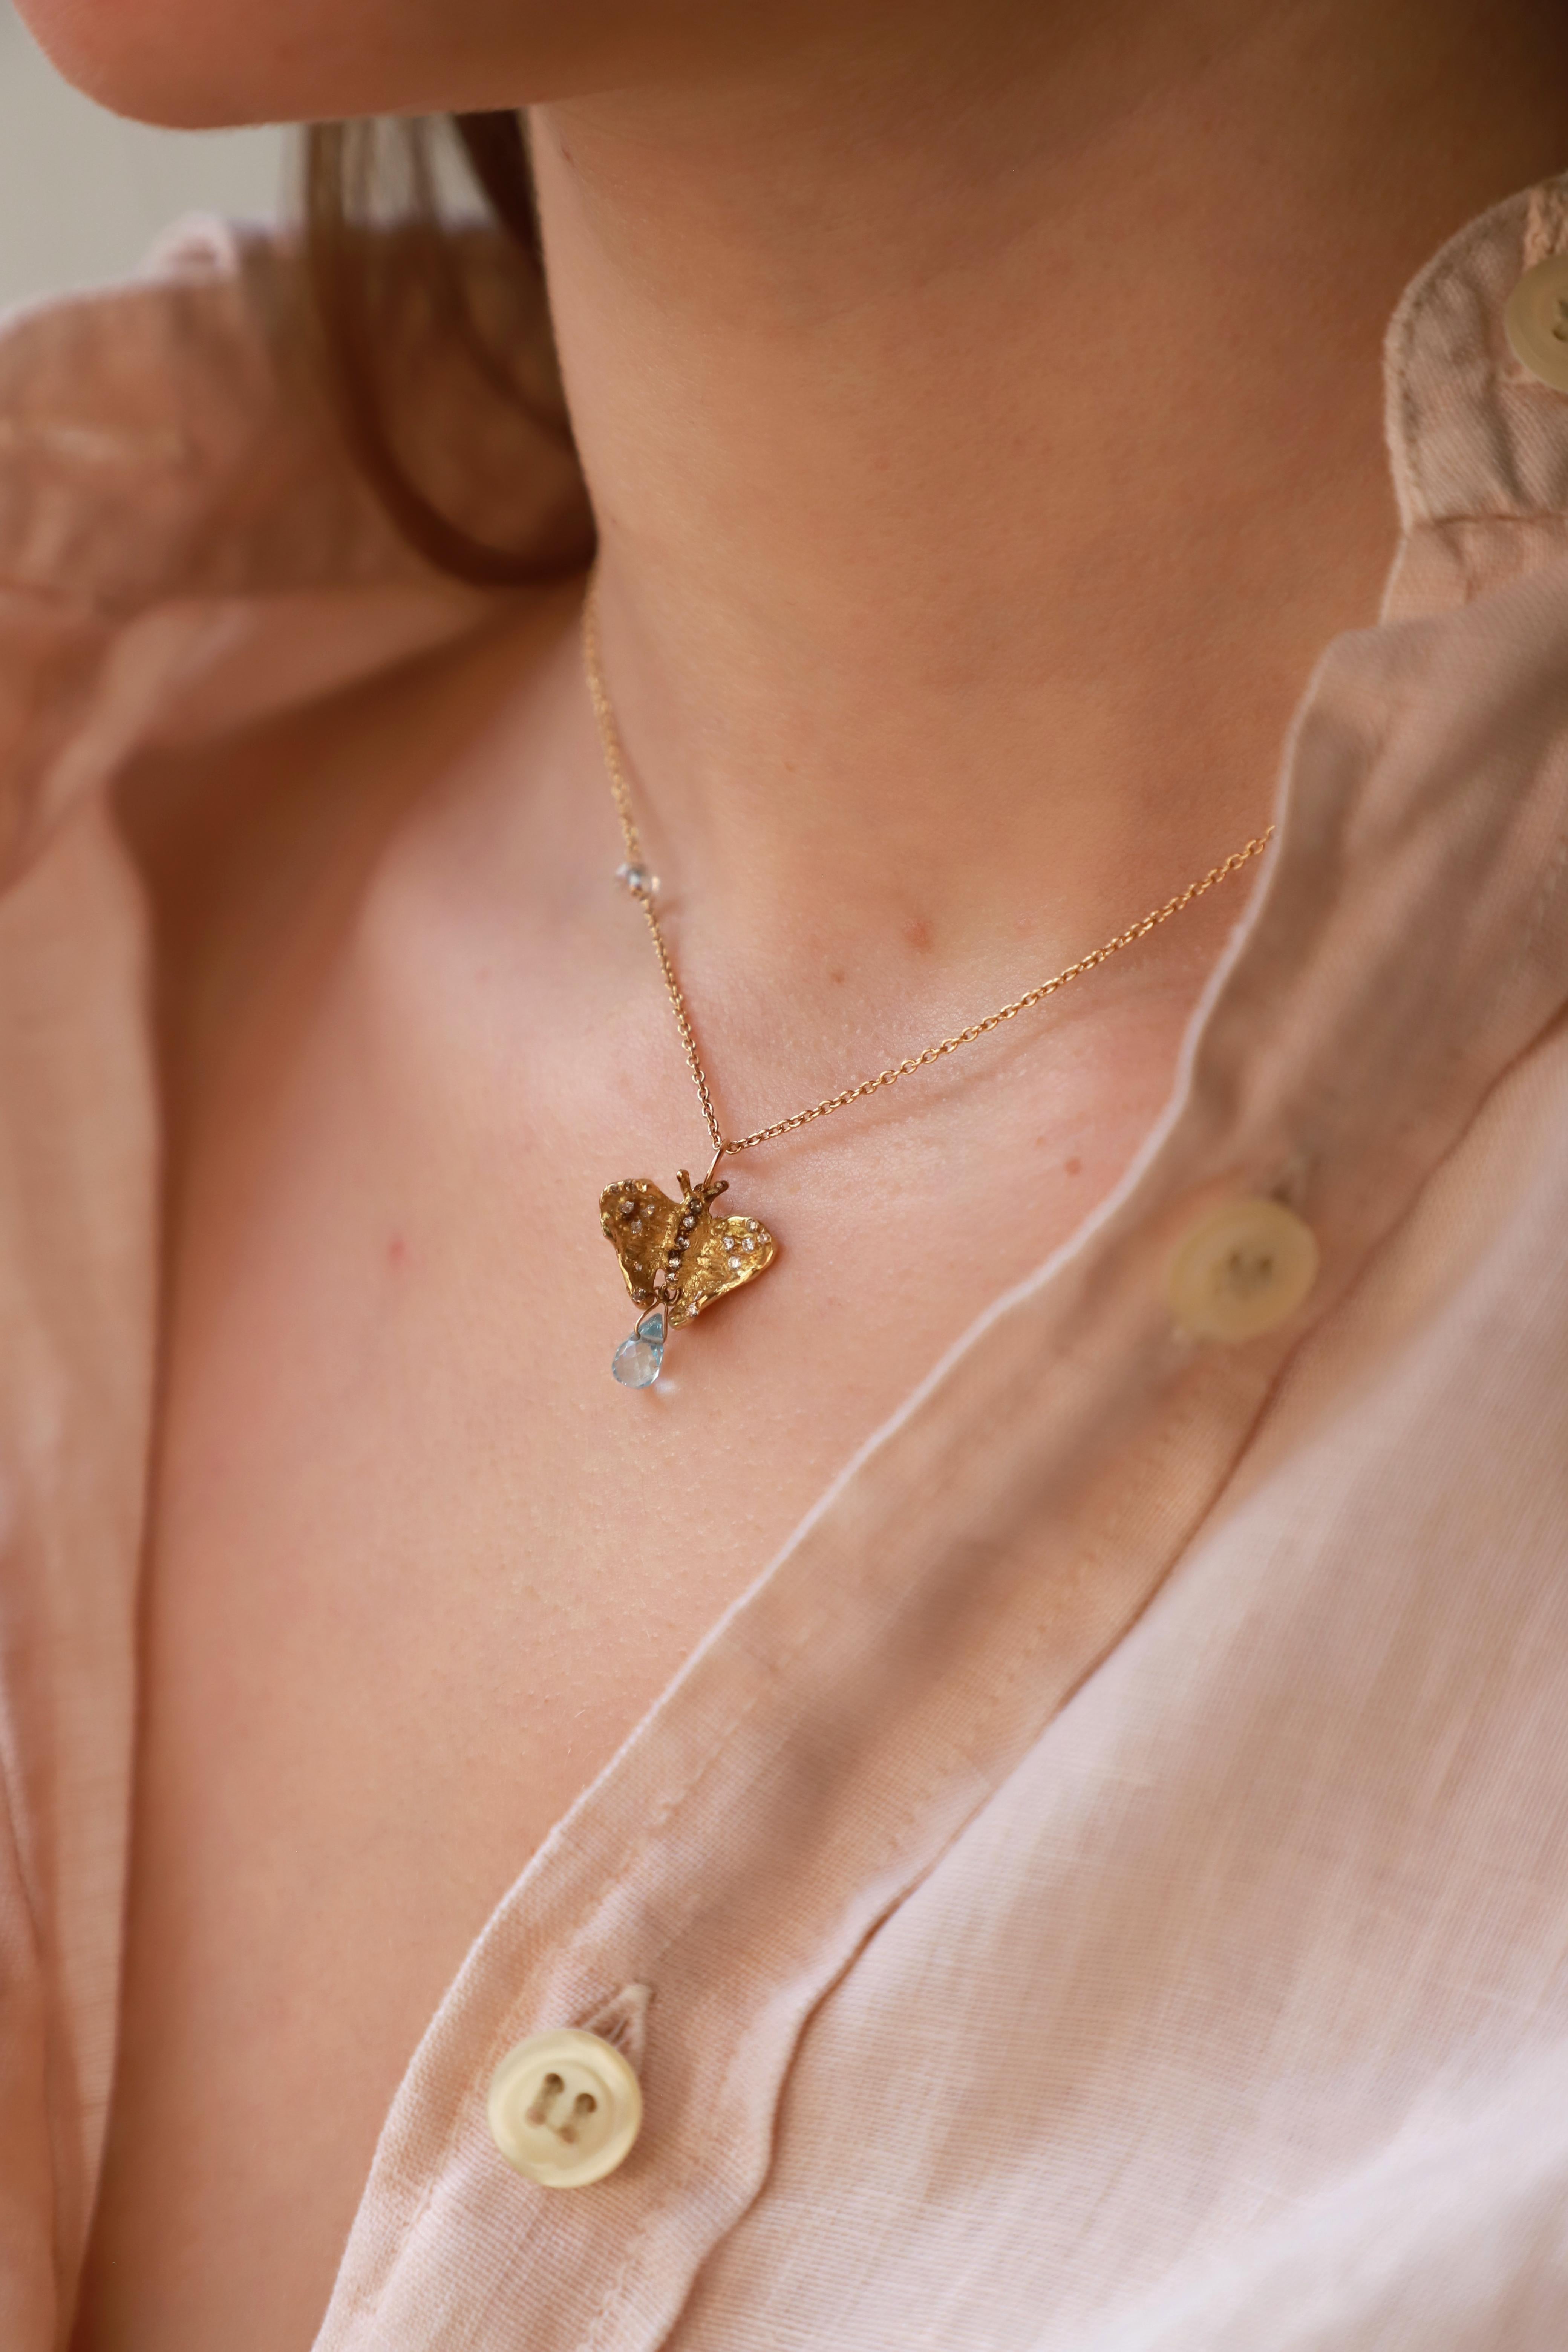 Rossella Ugolini Design Collection an enchanting pendant necklace handcrafted in 18 karats Yellow Gold chain with a light blue Aquamarine Drop. The pendent is a Butterfly made in 18 karats yellow gold embellished with white diamonds wings.
Fly away.